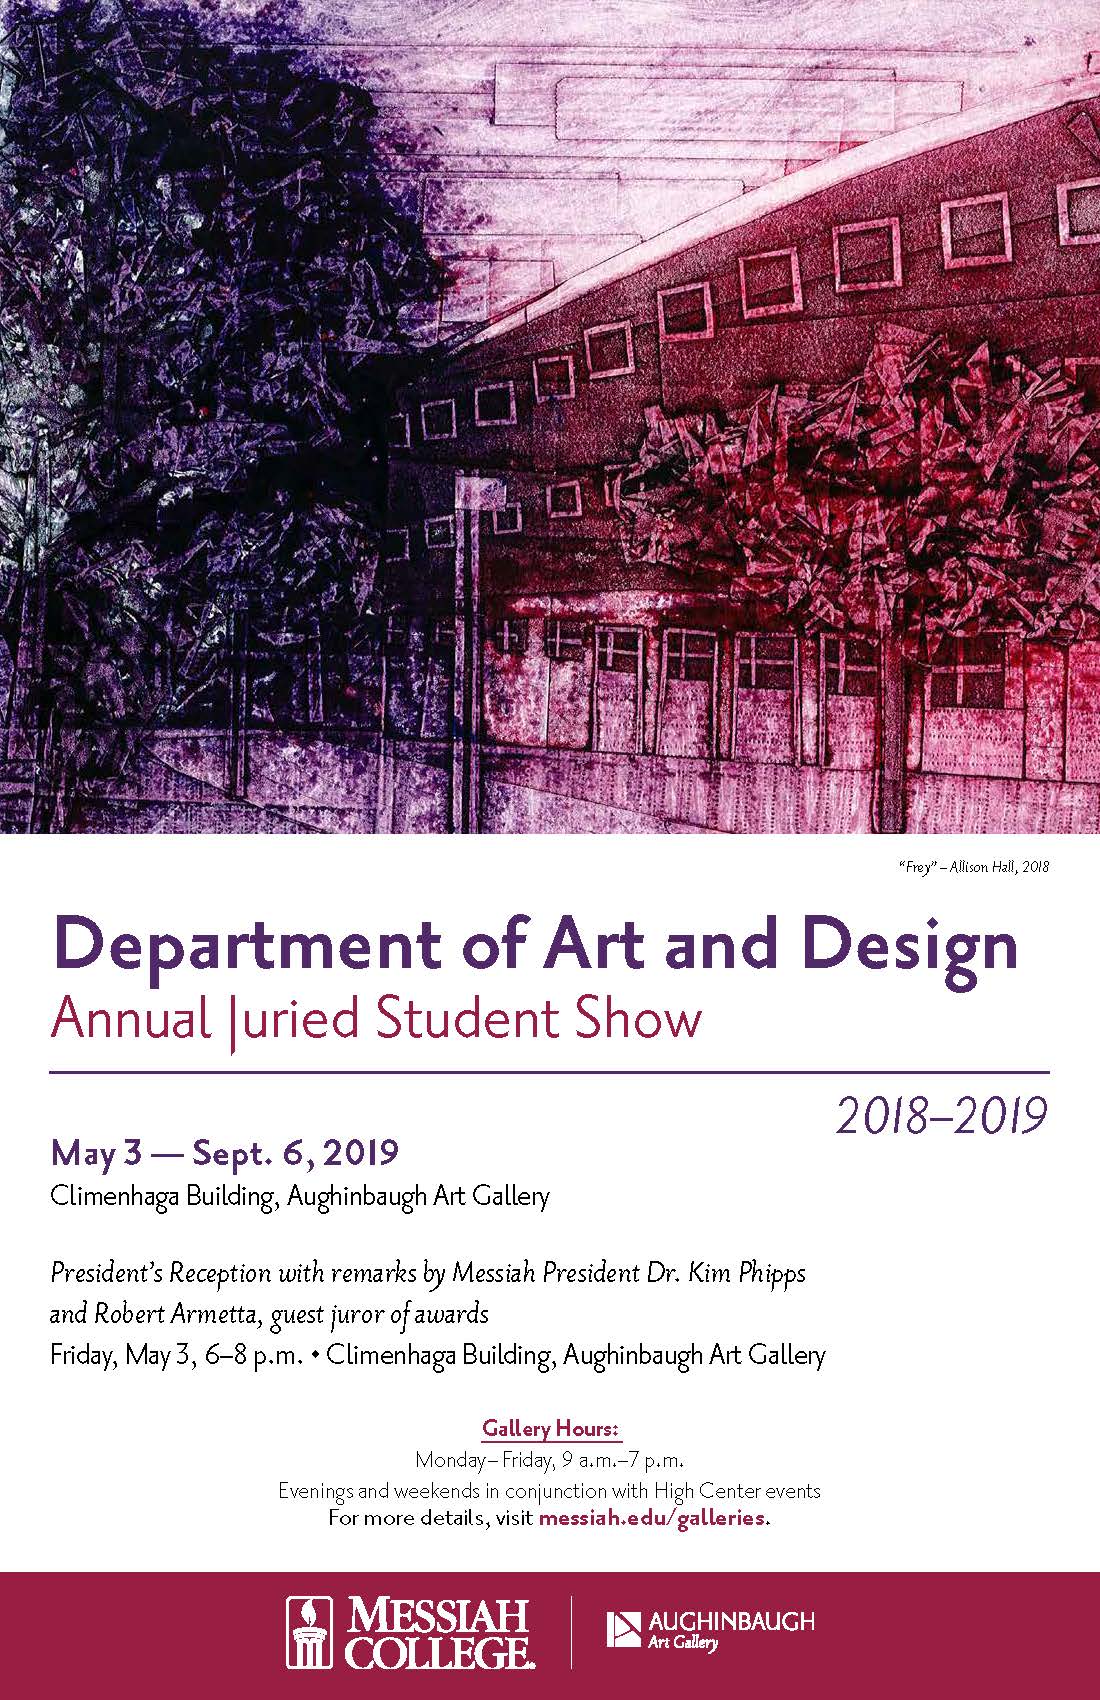 19 1262 Annual juried student show poster 11x17 2018-2019